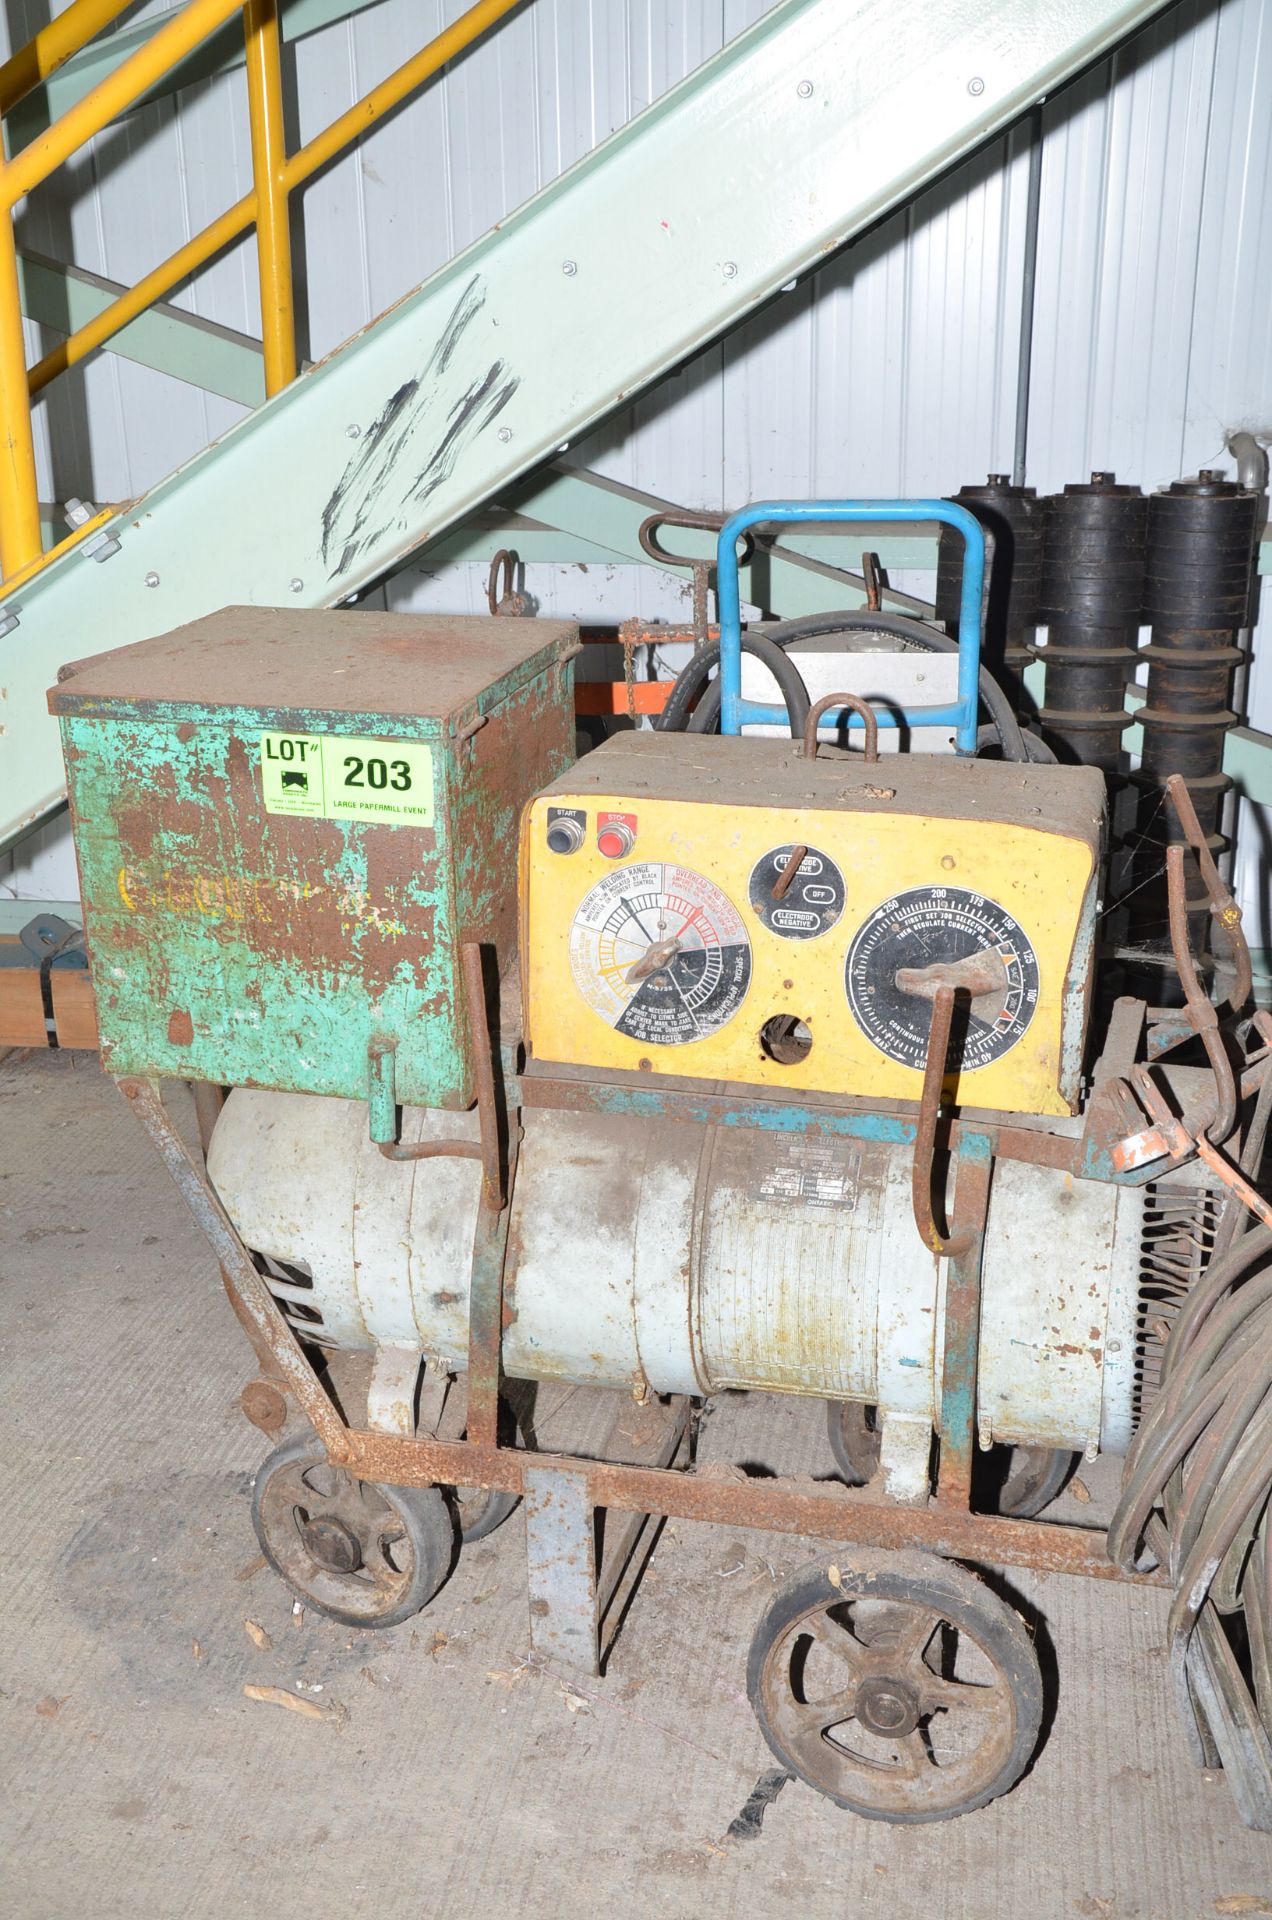 LINCOLN ELECTRIC PORTABLE ARC WELDER WITH CABLES AND GUN, S/N: N/A [RIGGING FEES FOR LOT #203 - $